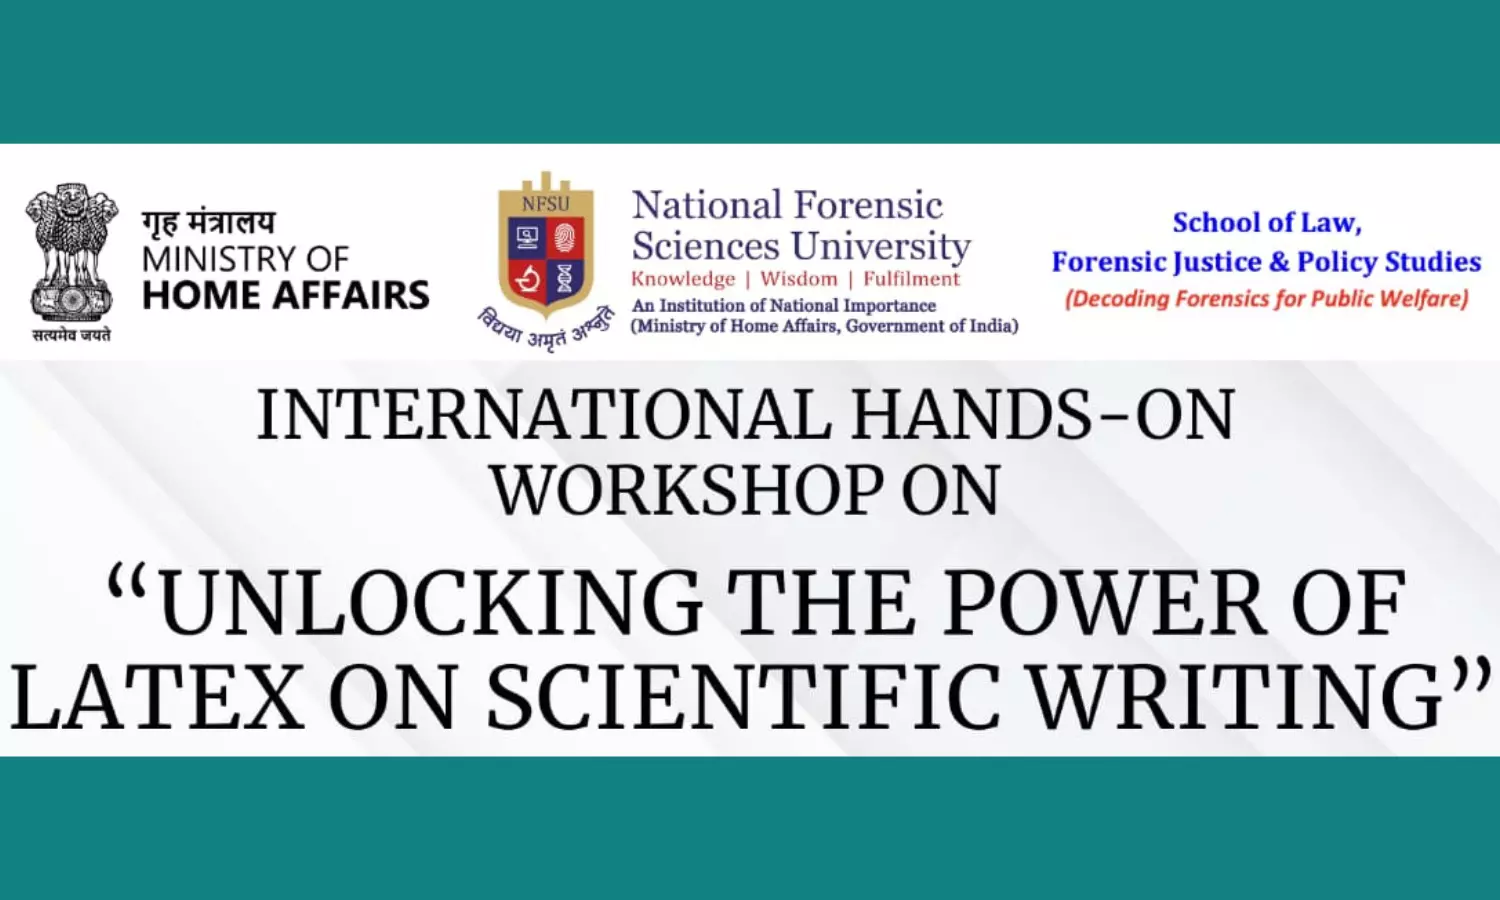 International Hands On Workshop on Unlocking the Power of LaTeX on Scientific Writing | National Forensic Sciences University | 17/06/2023 & 18/06/2023.